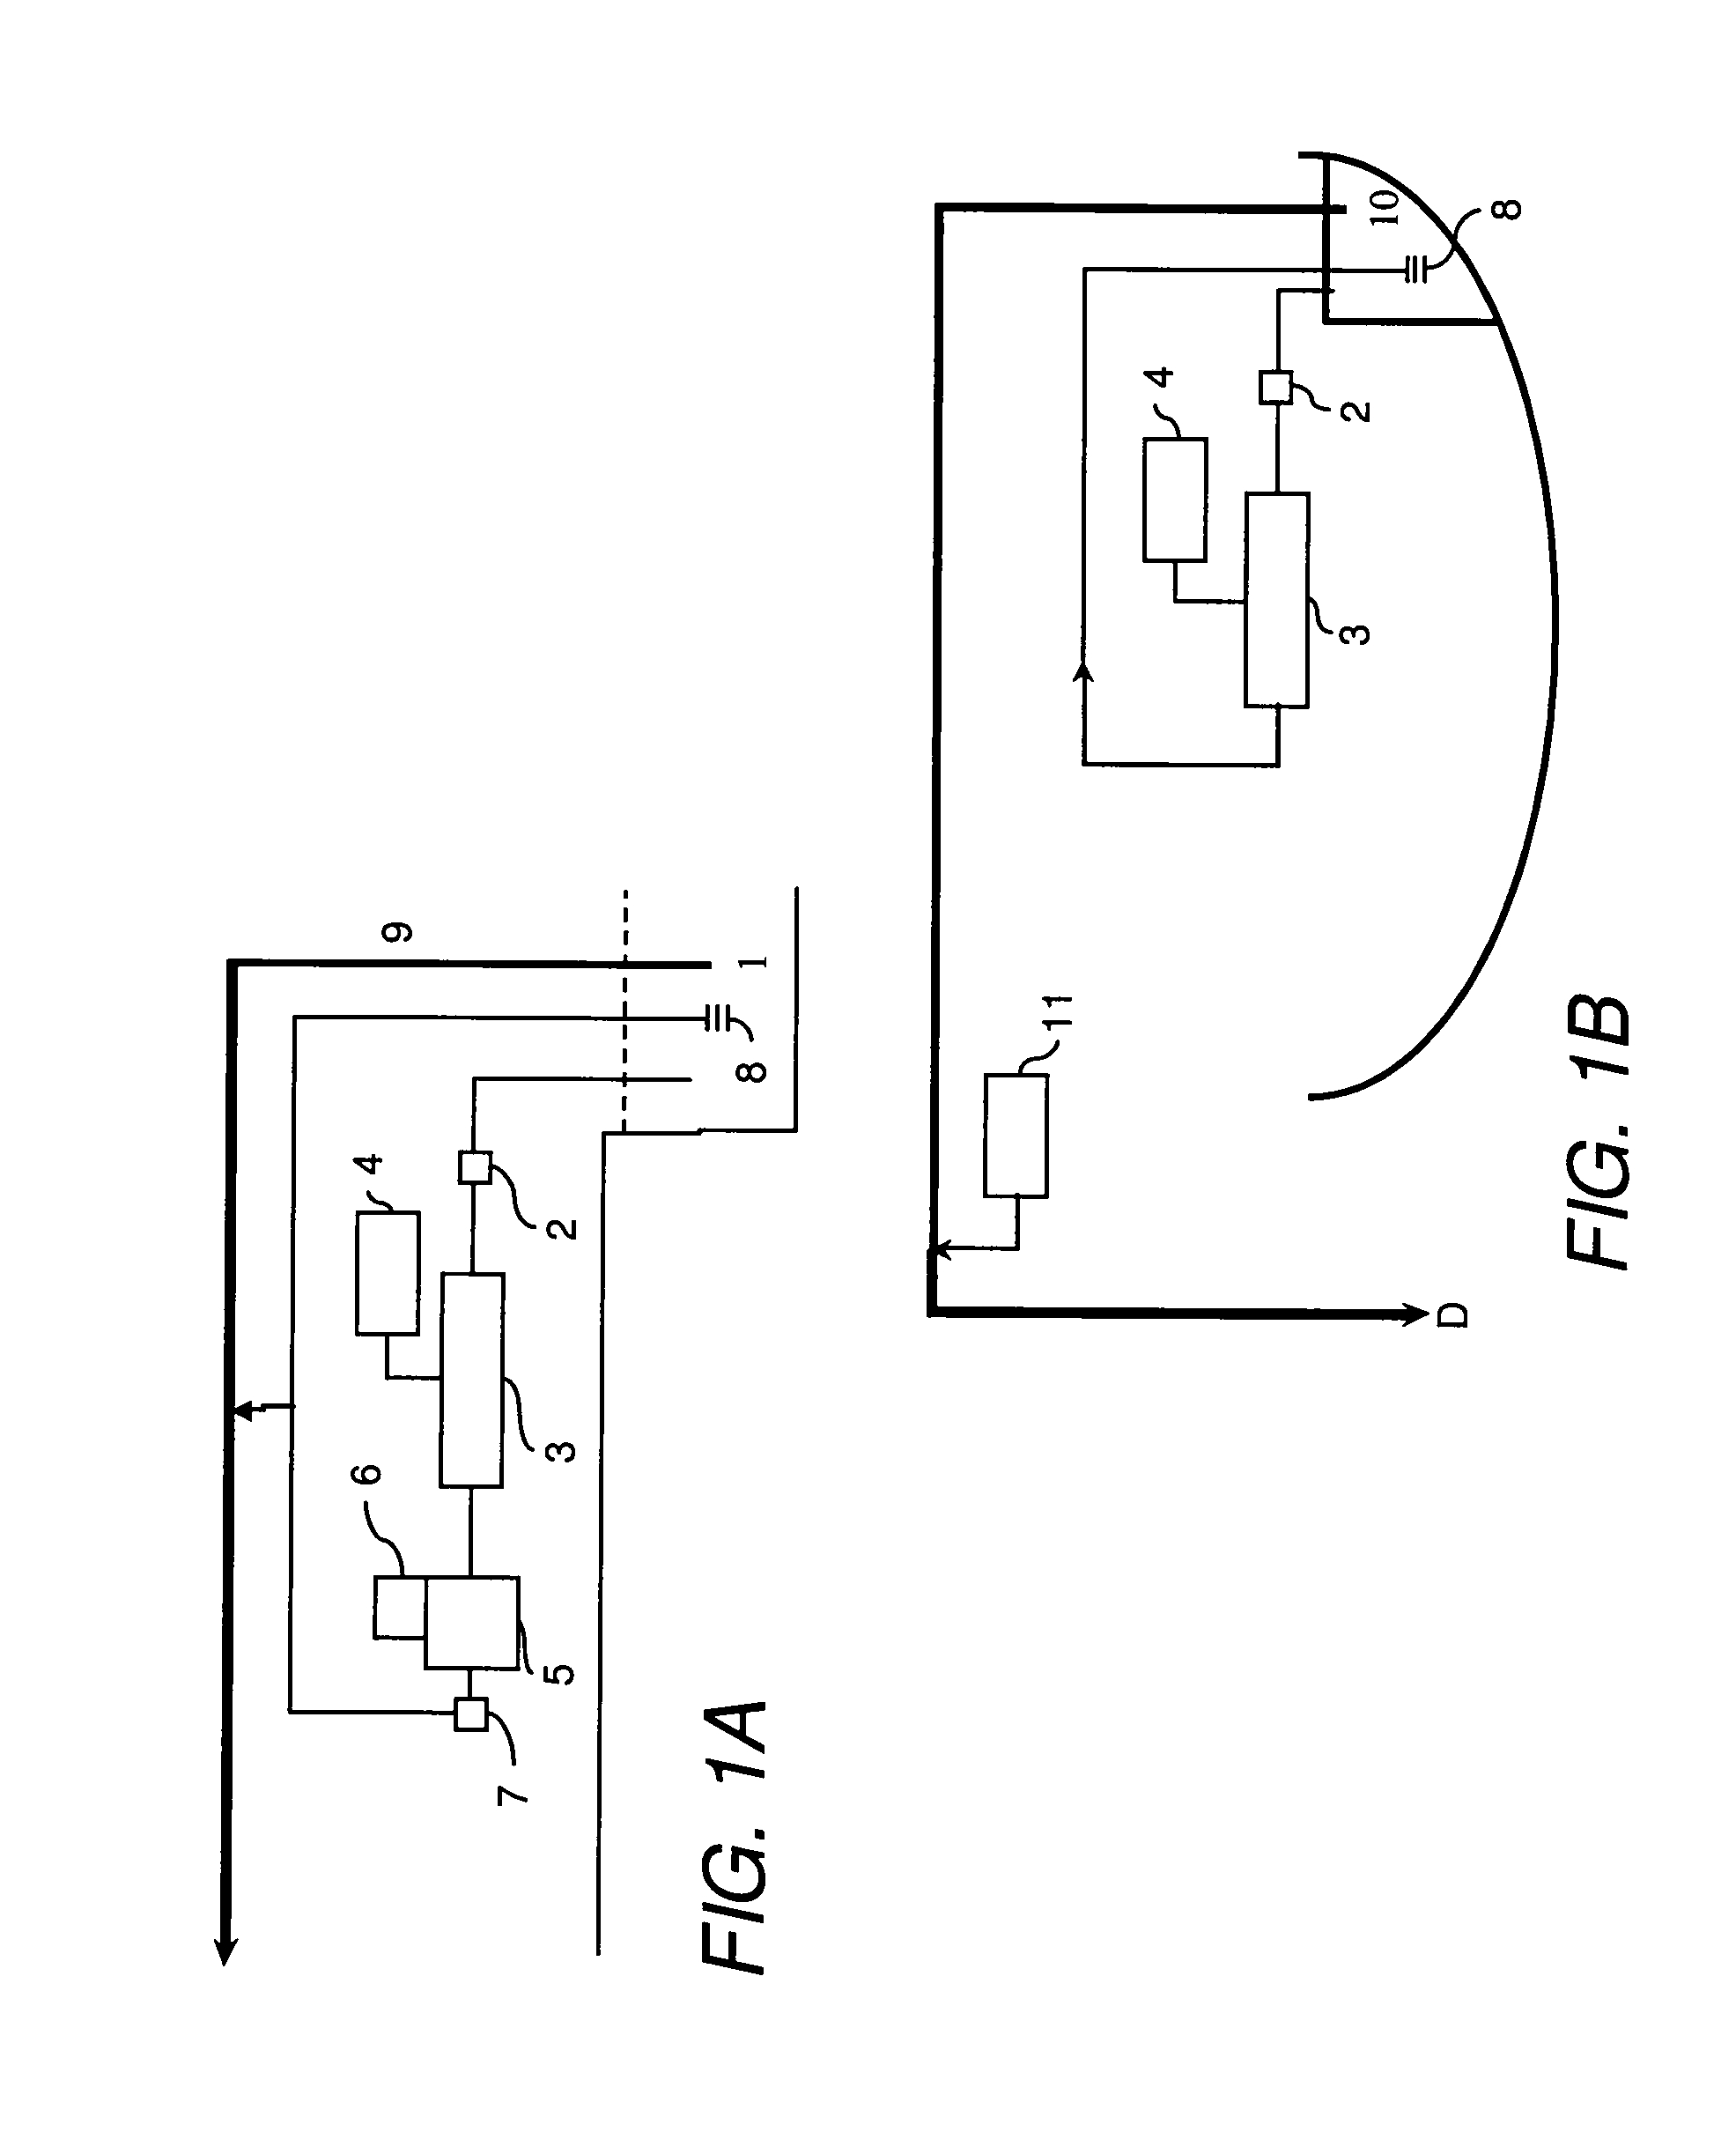 Method and System for Biofouling Control of Shipboard Components